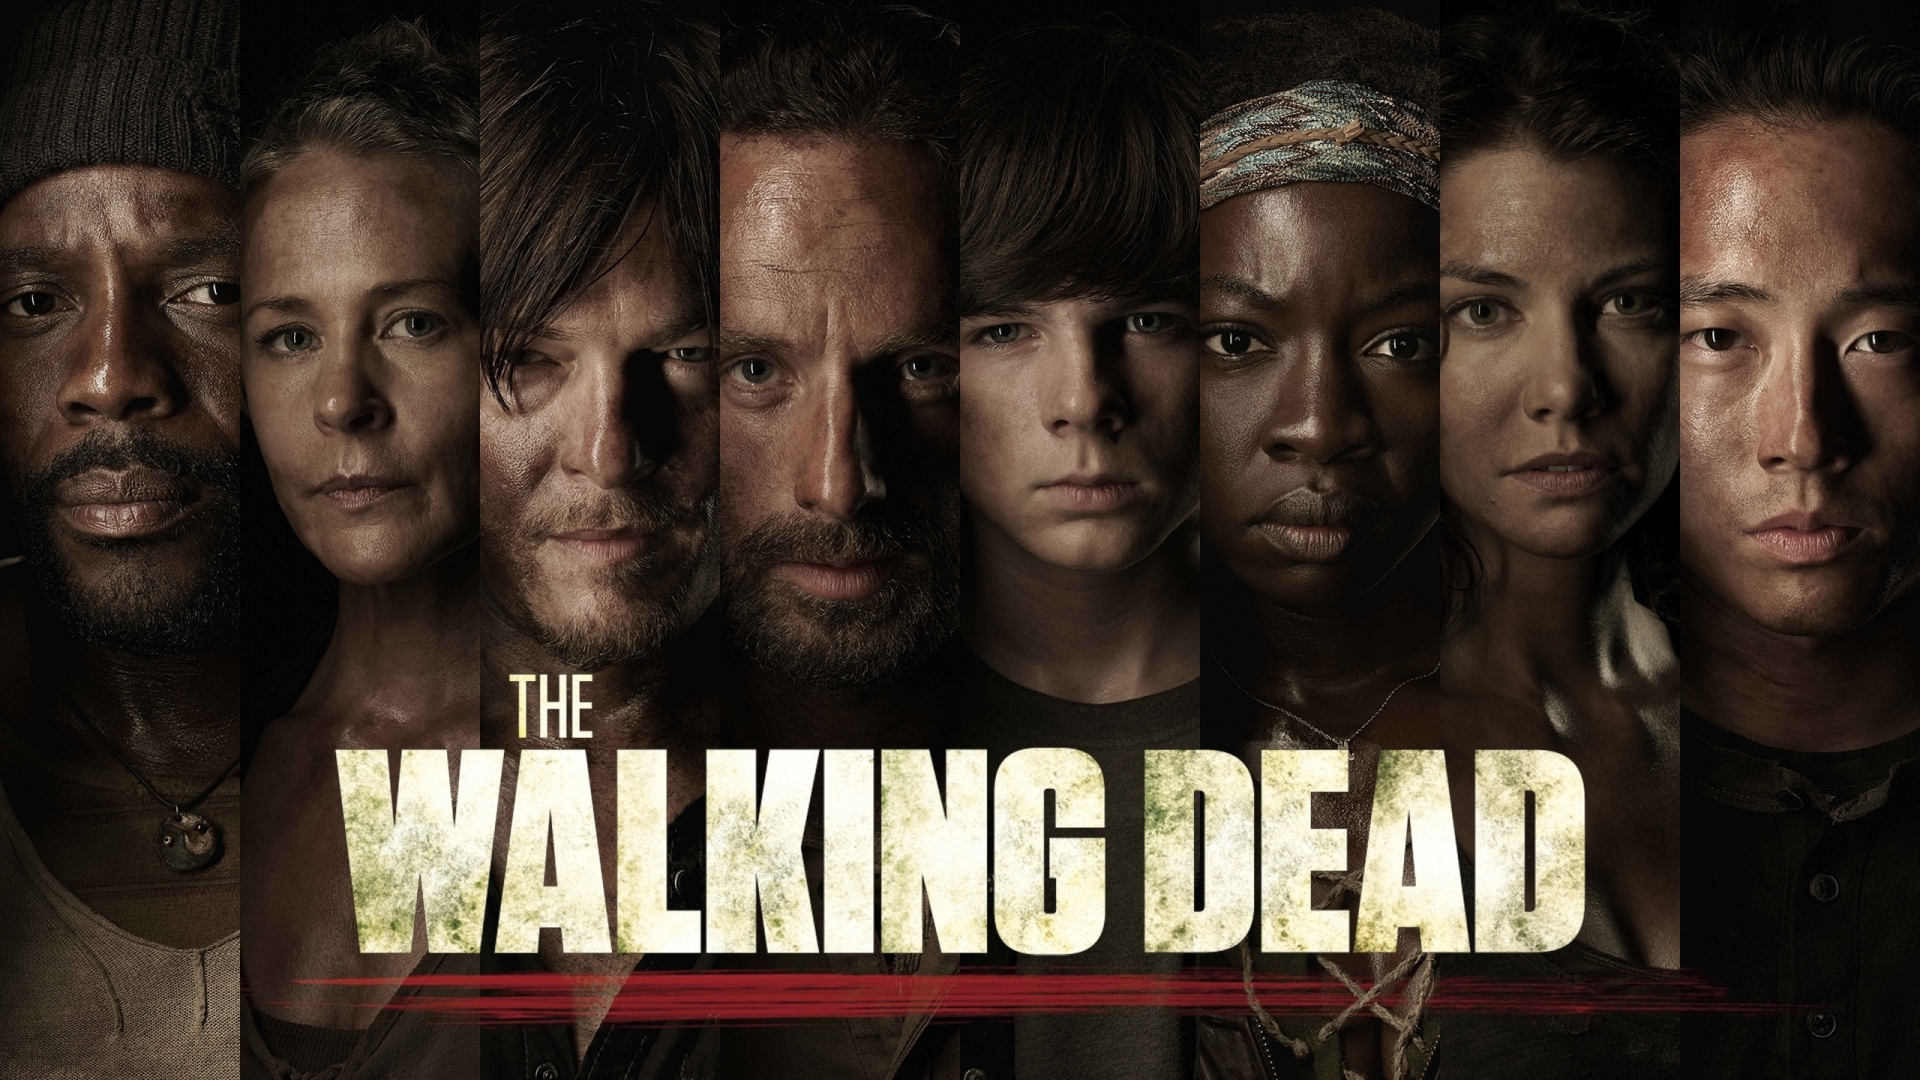 The Walking Dead Characters Poster for 1920 x 1080 HDTV 1080p resolution